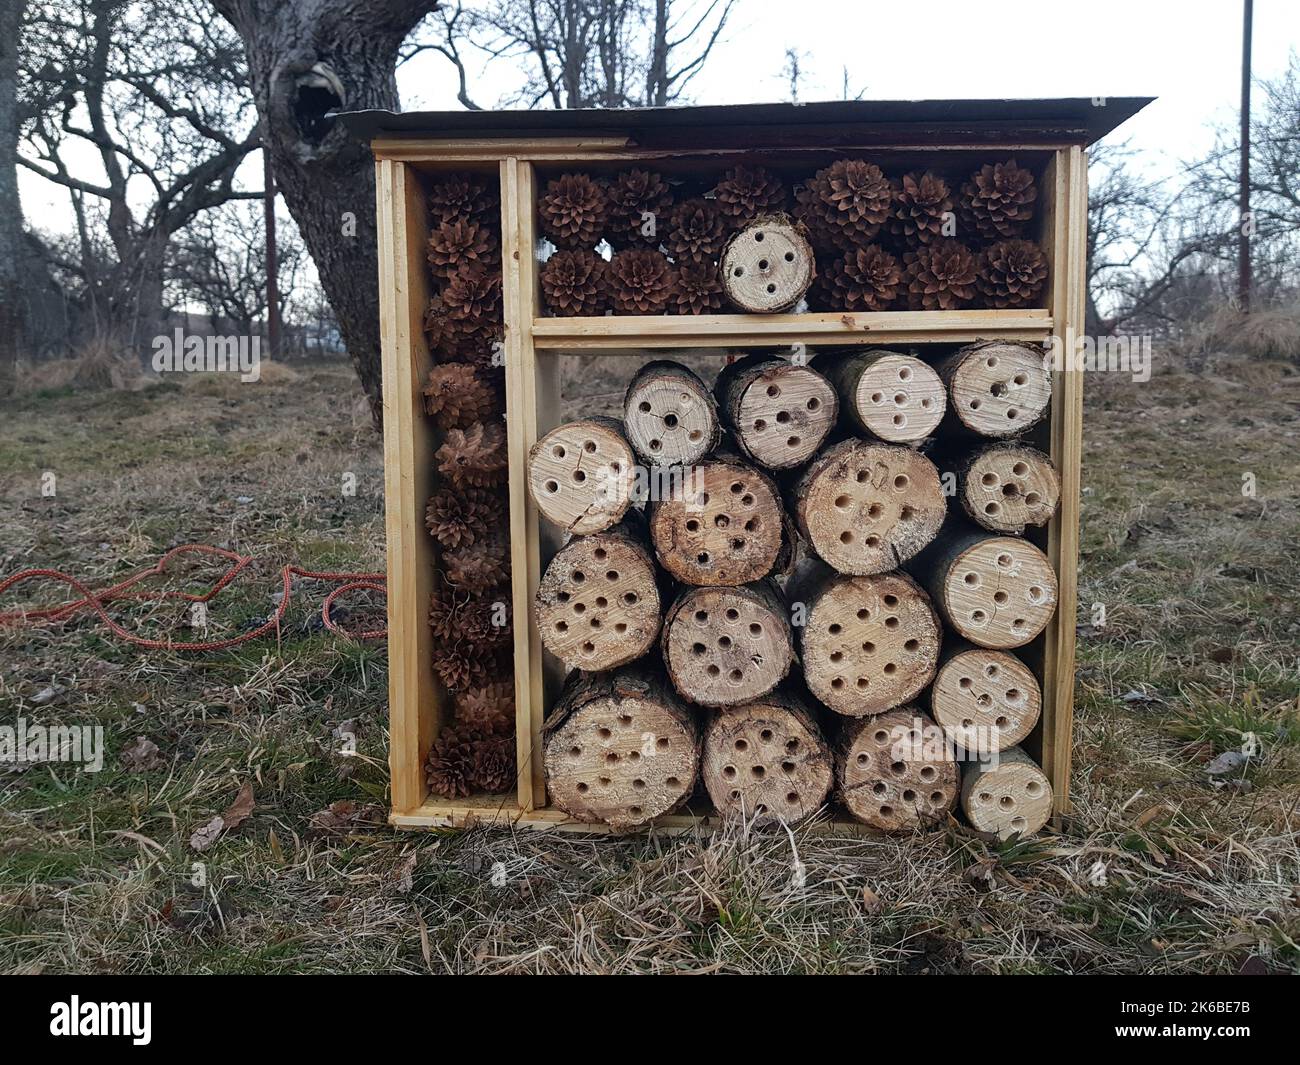 Bug, insect hotel in the outdoors Stock Photo